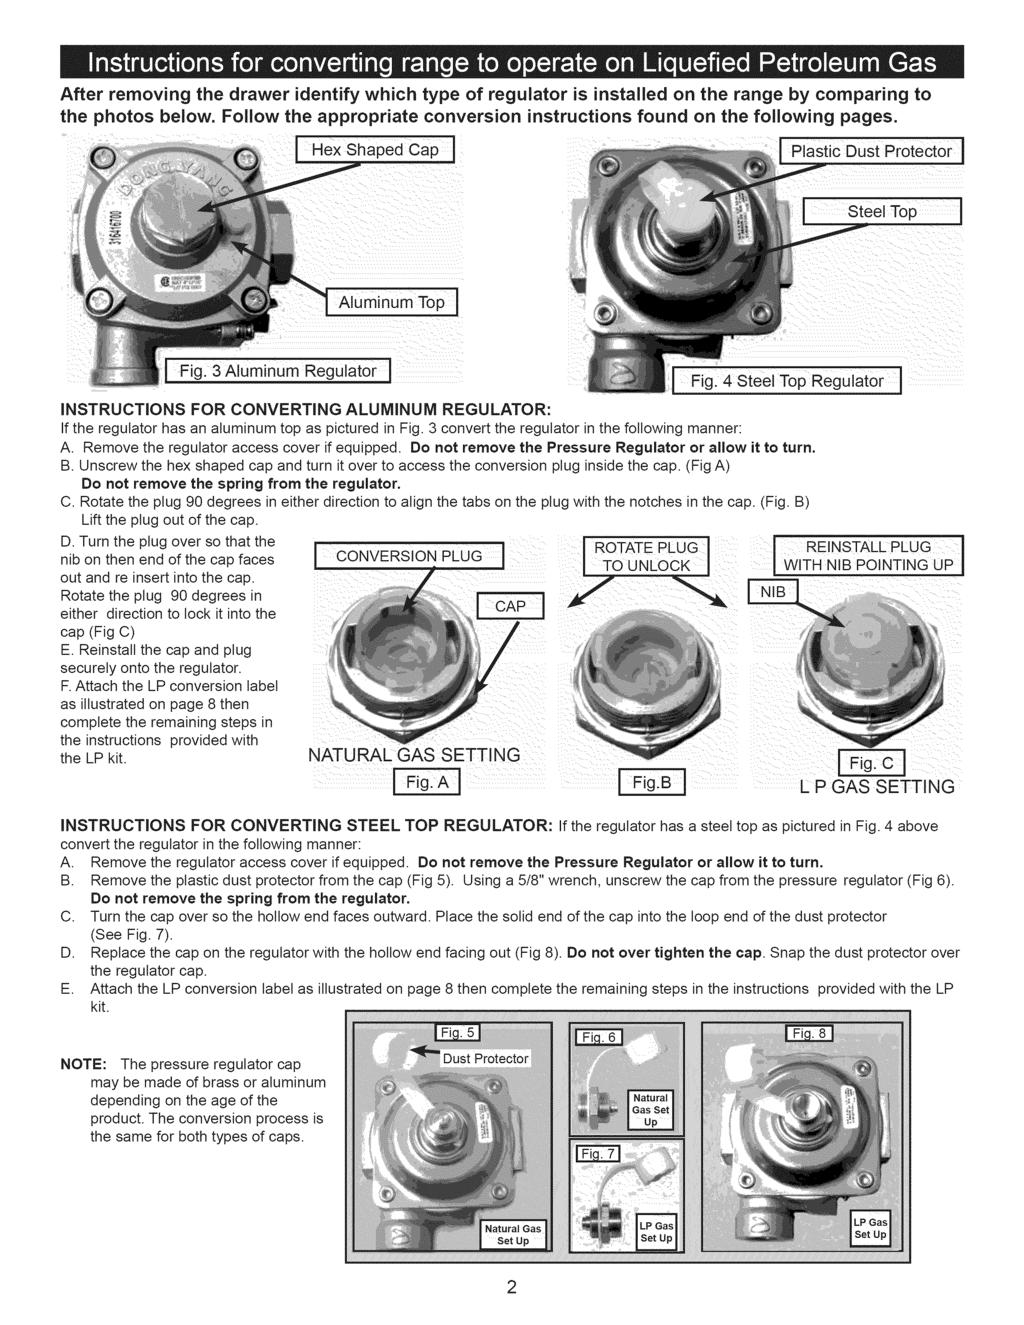 After removing the drawer identify which type of regulator is installed on the range by comparing to the photos below. Follow the appropriate conversion instructions found on the following pages.